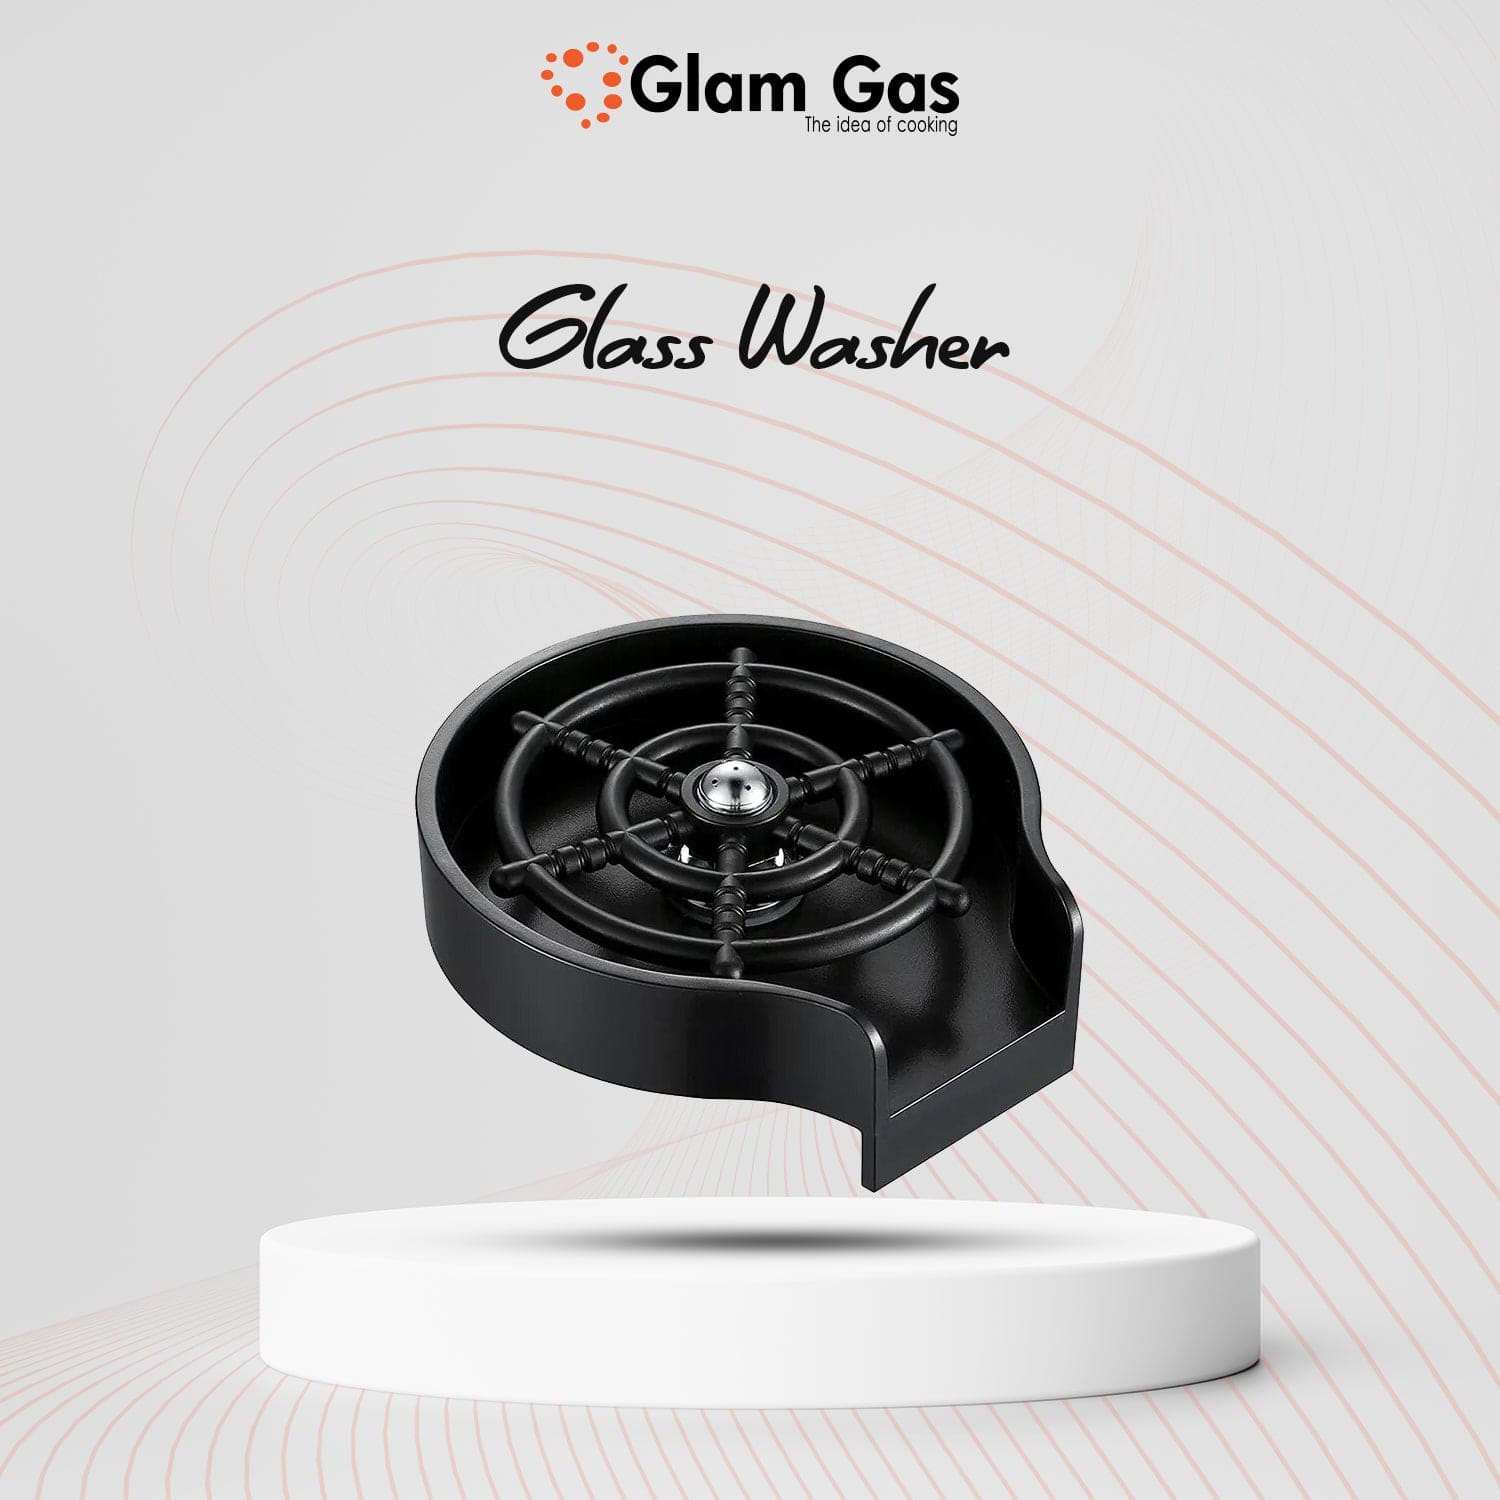 Shop Now For Glam Gas |Sink Glass Washer Just a few Click in Pakistan